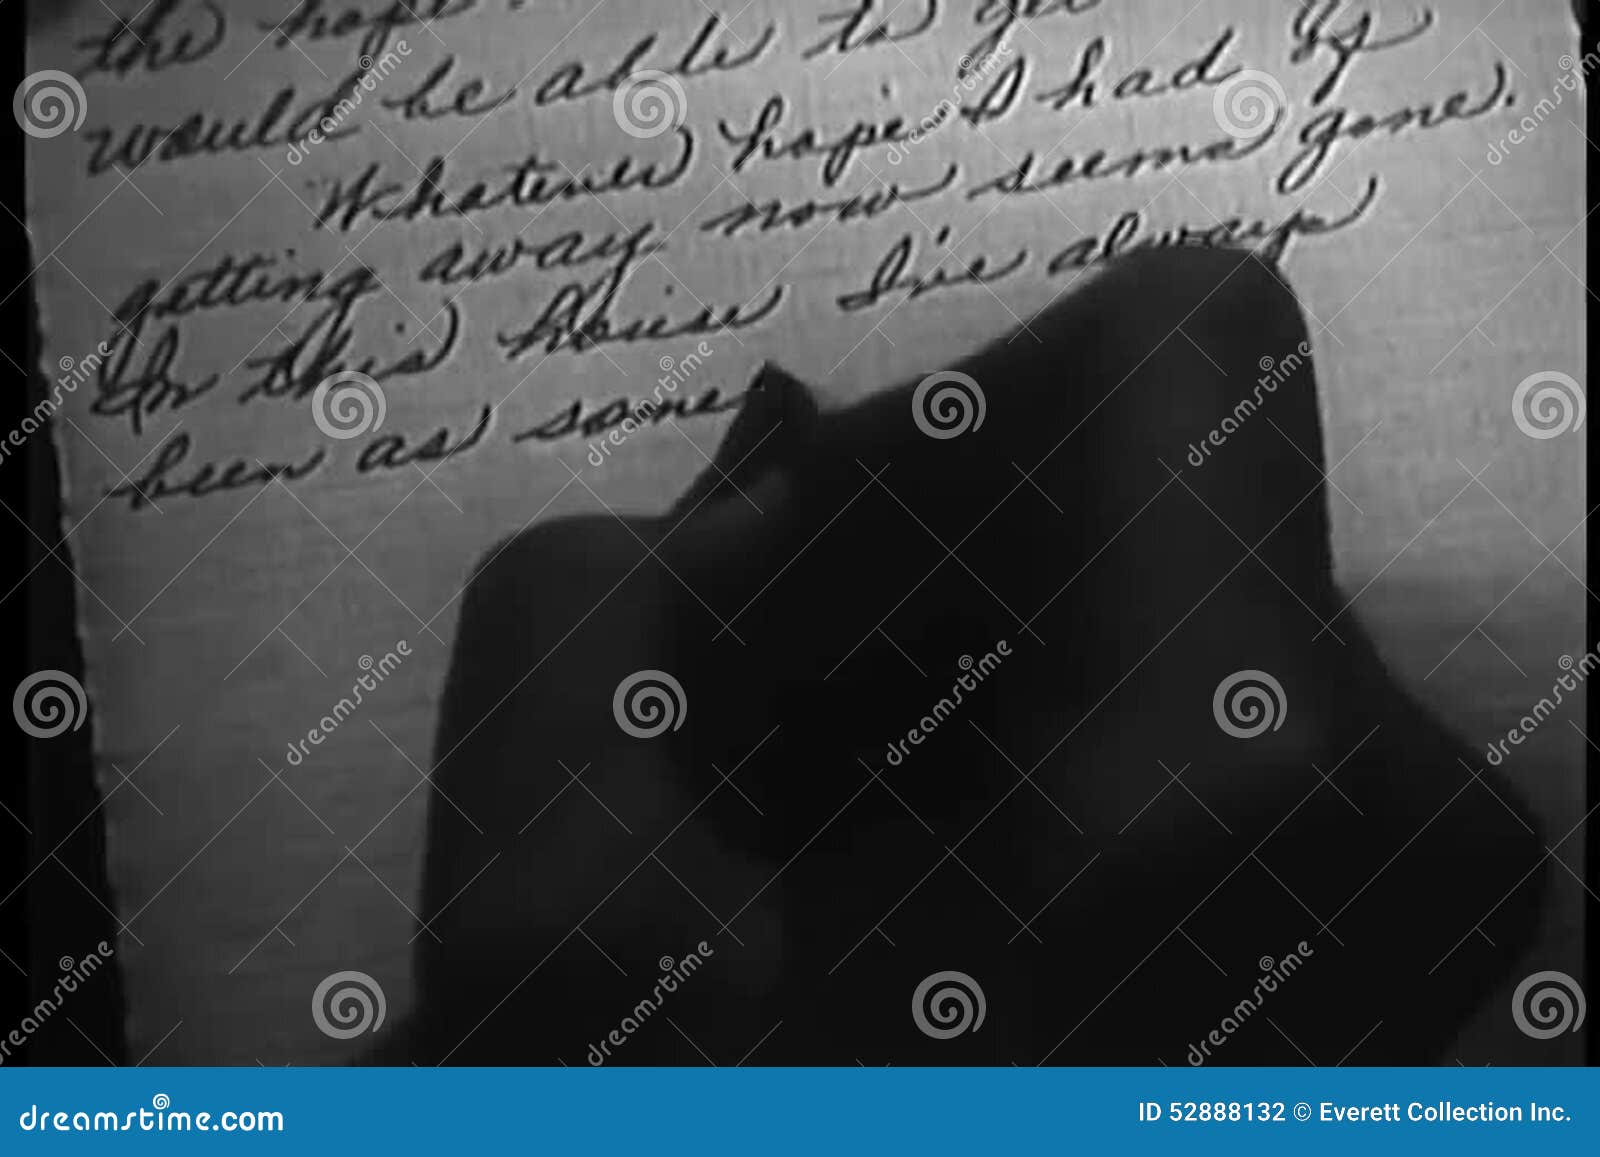 Blonde woman writing in bed - wide 4